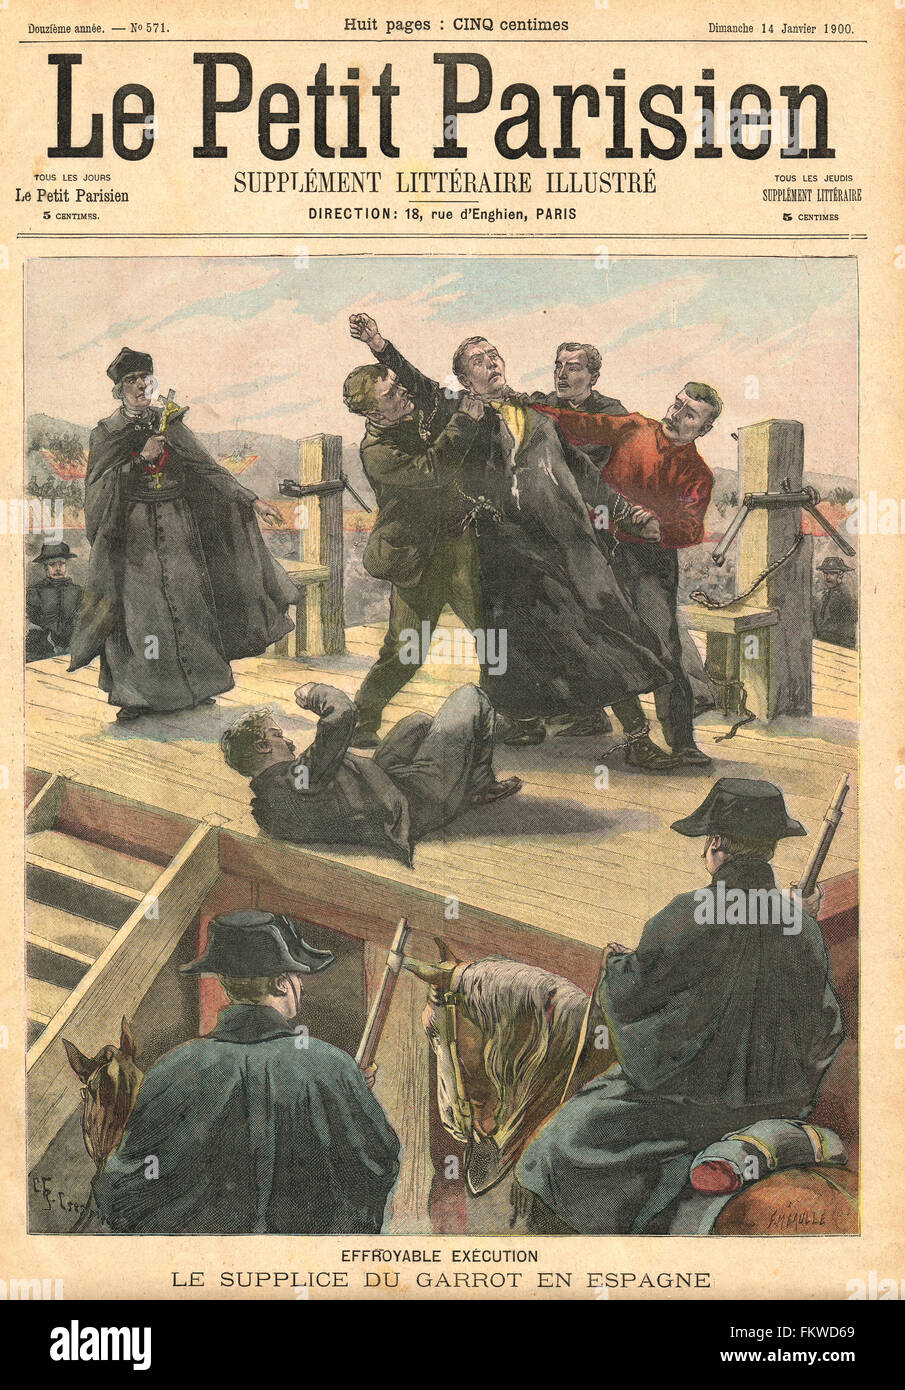 Execution by garroting in Spain 1900.  French illustrated newspaper Le Petit Parisien illustration Stock Photo